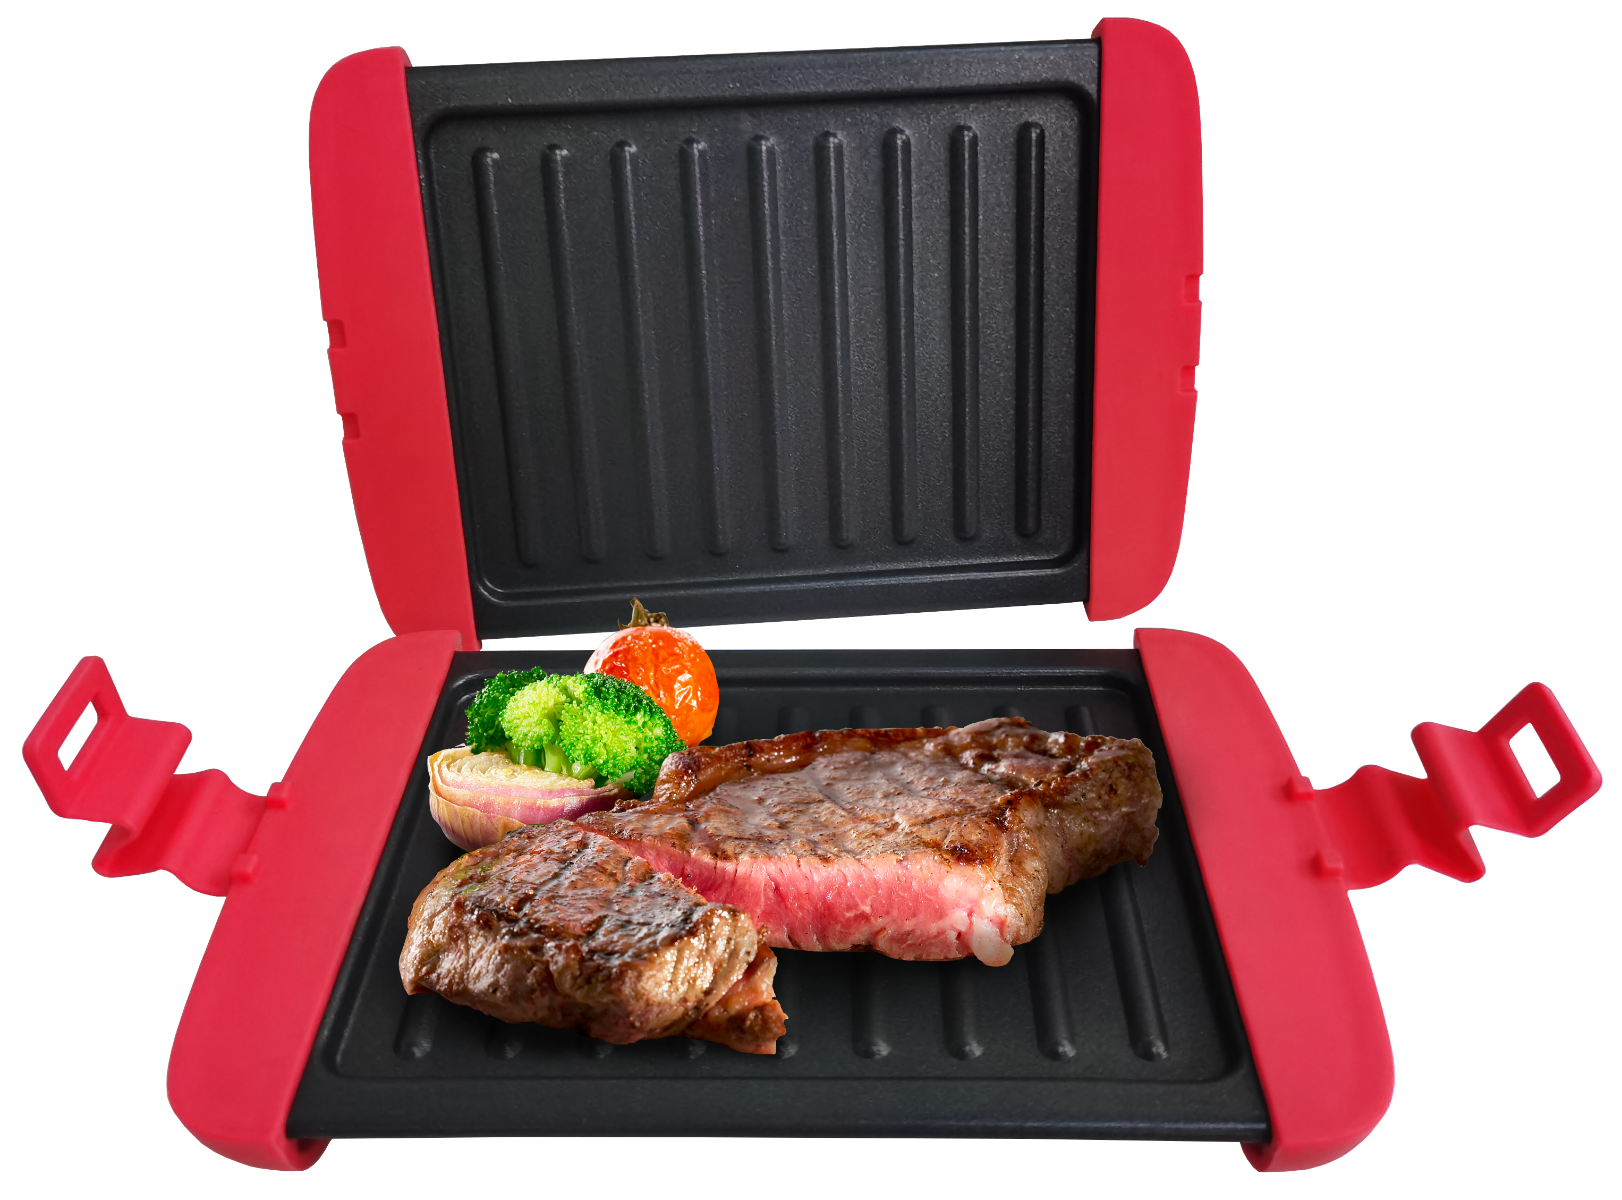 Microwave Long Grill Easy to use non-stick microwave BBQ grill